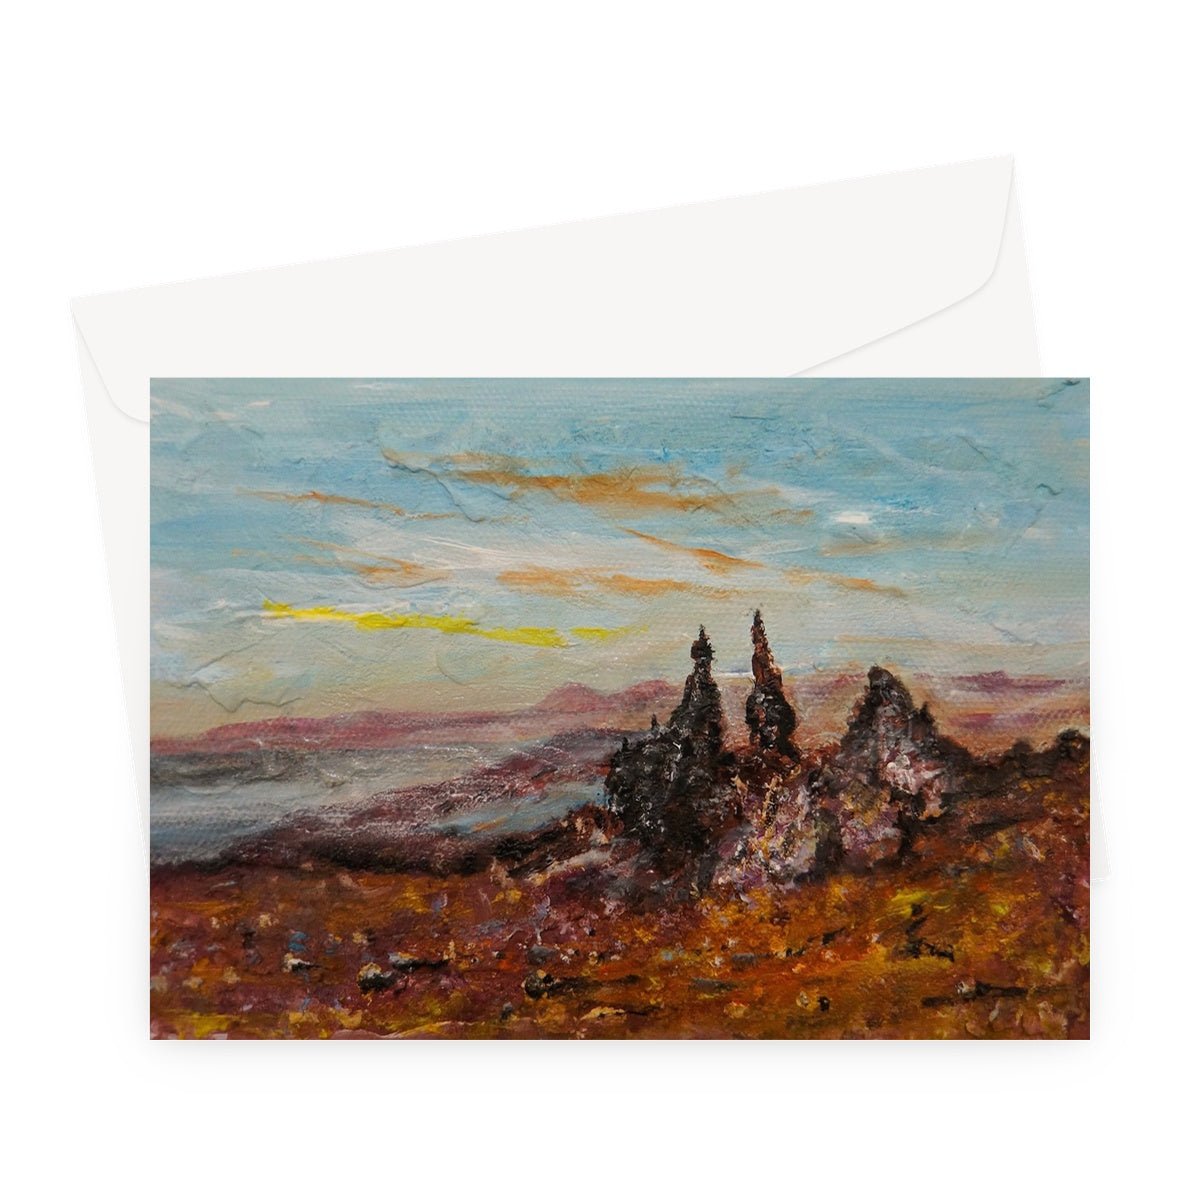 The Old Man Of Storr Skye Art Gifts Greeting Card-Greetings Cards-Skye Art Gallery-A5 Landscape-1 Card-Paintings, Prints, Homeware, Art Gifts From Scotland By Scottish Artist Kevin Hunter